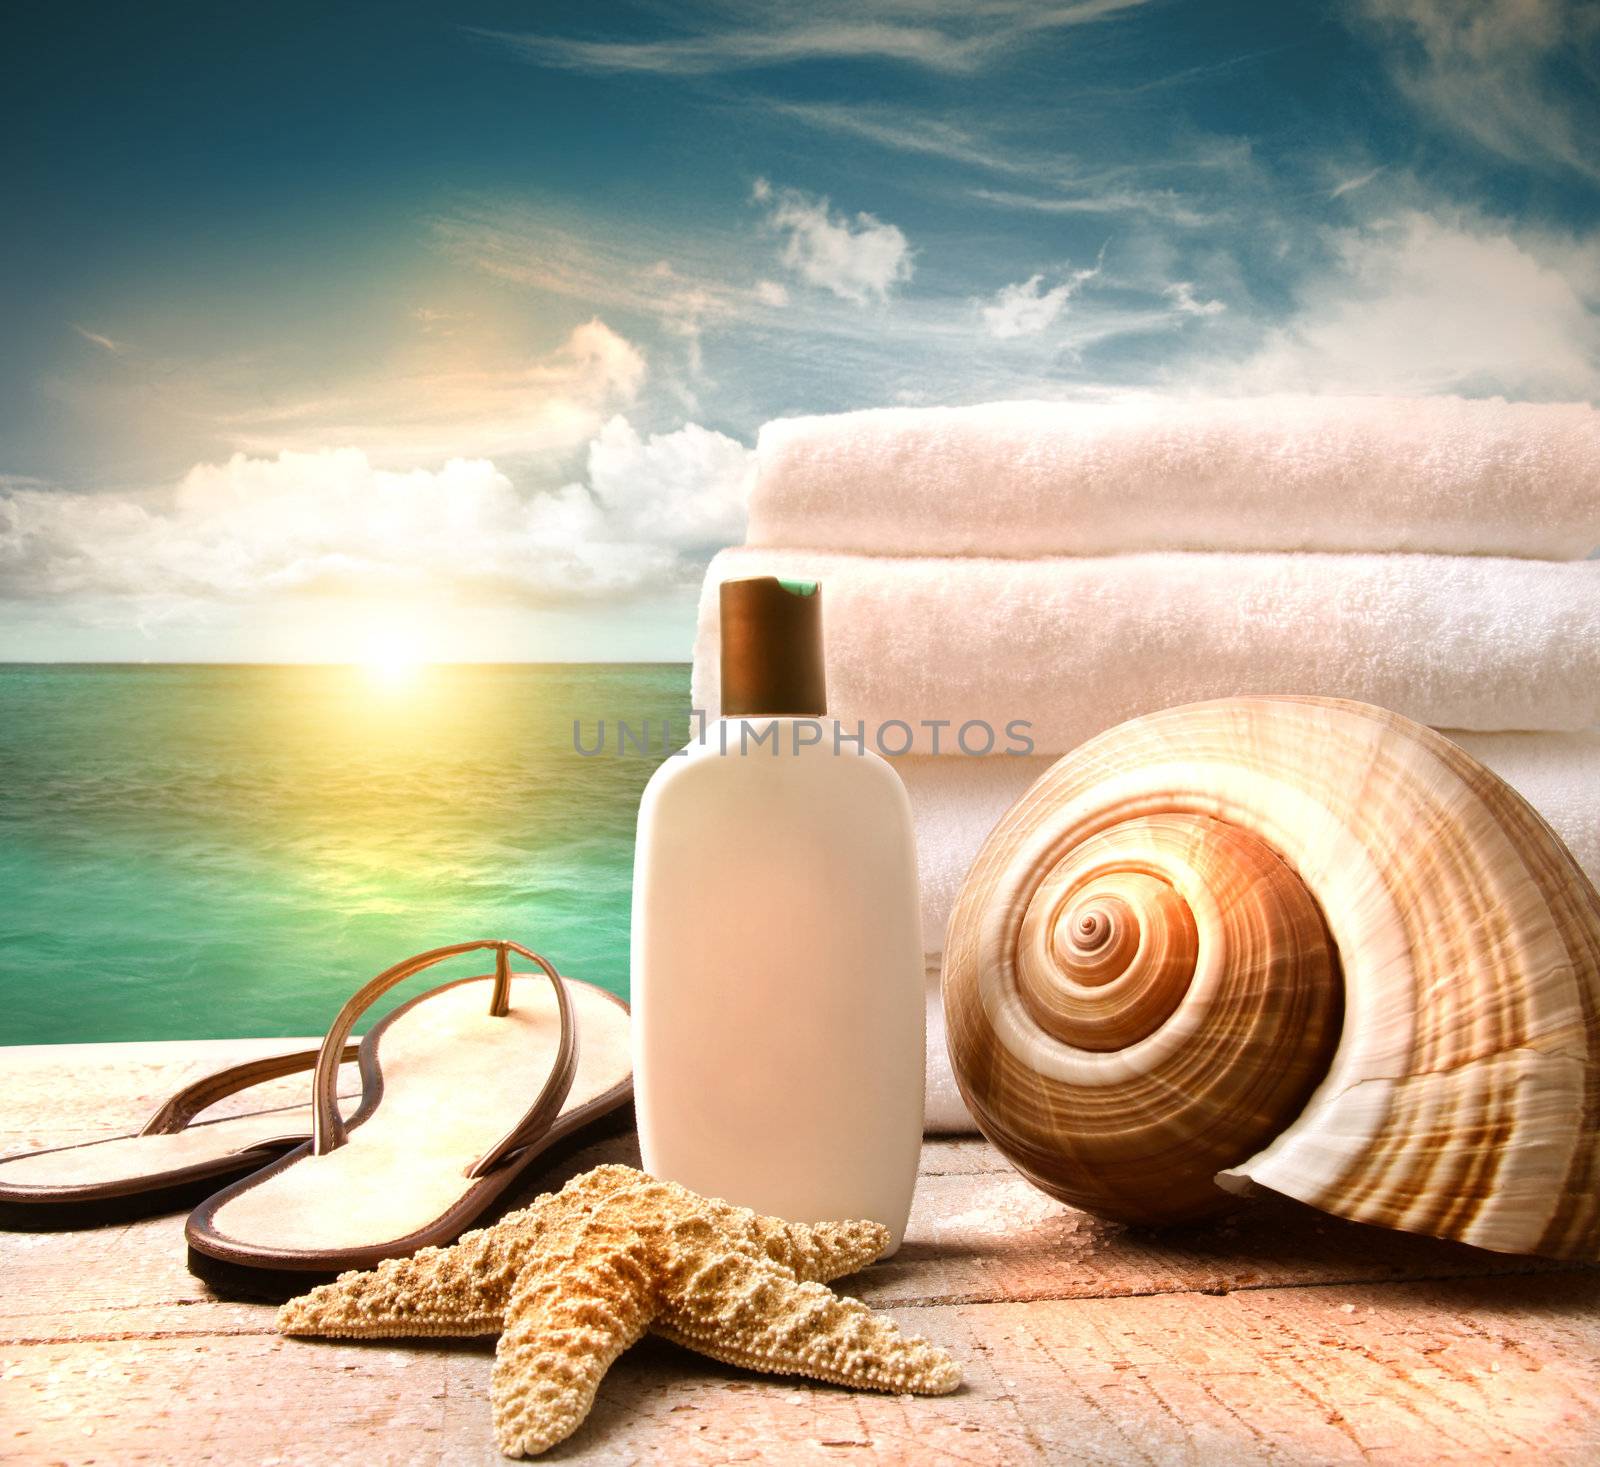 Sunblock lotion and white towels with ocean scene